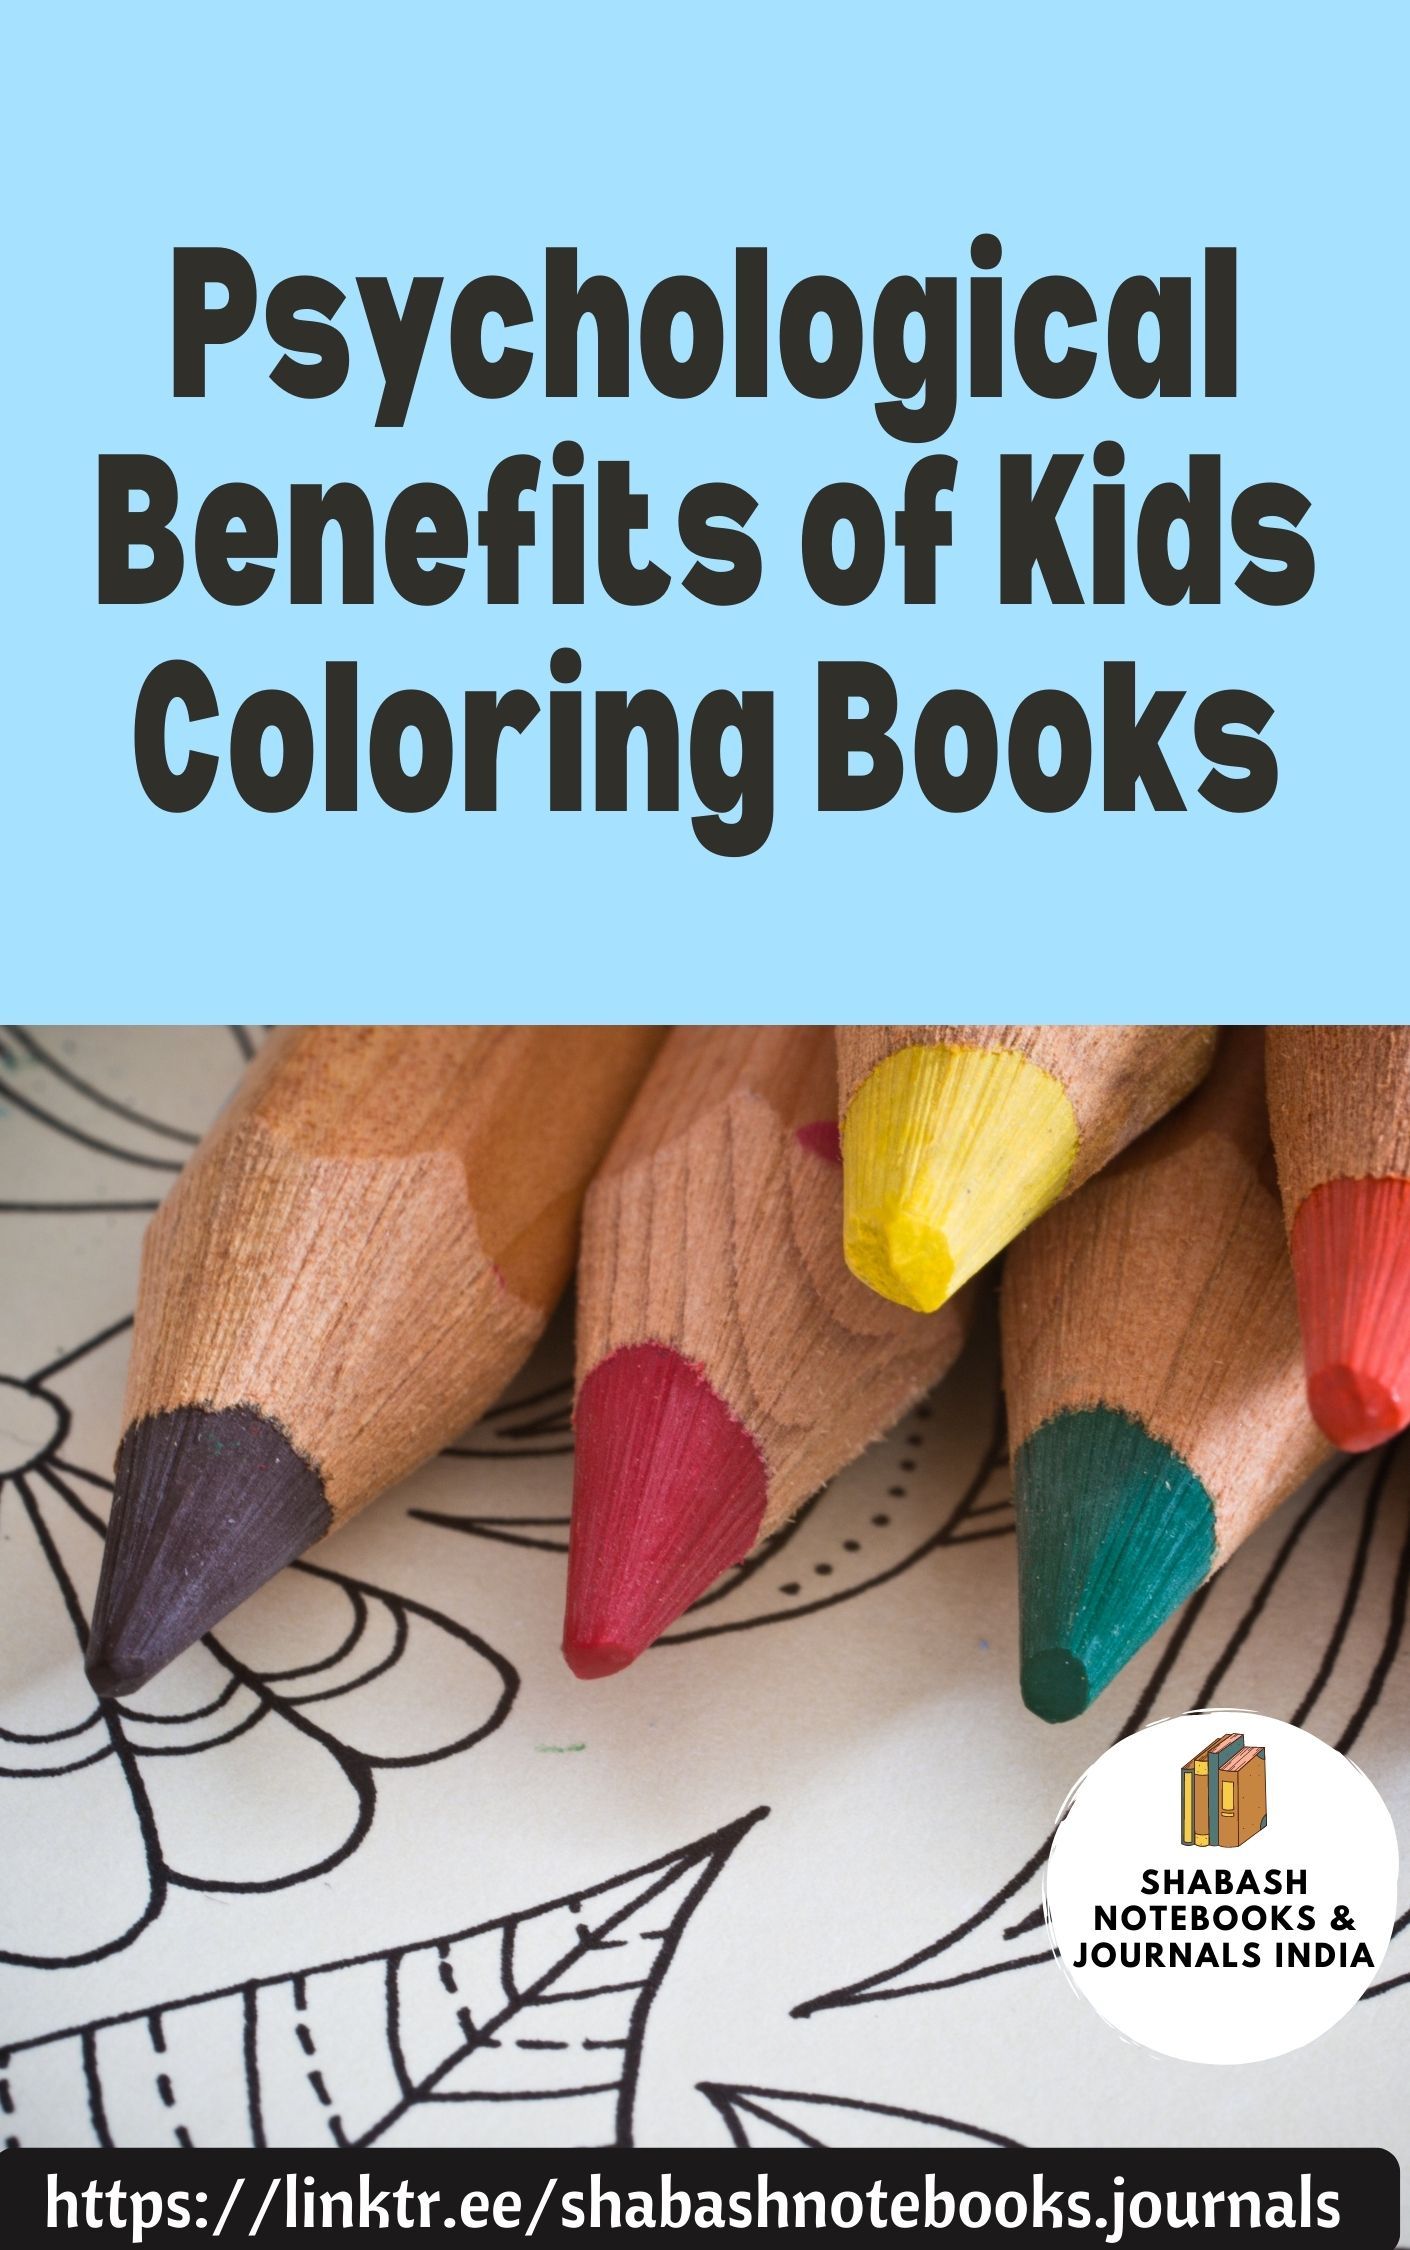 Psychological Benefits of Kids Coloring Books's Book Image